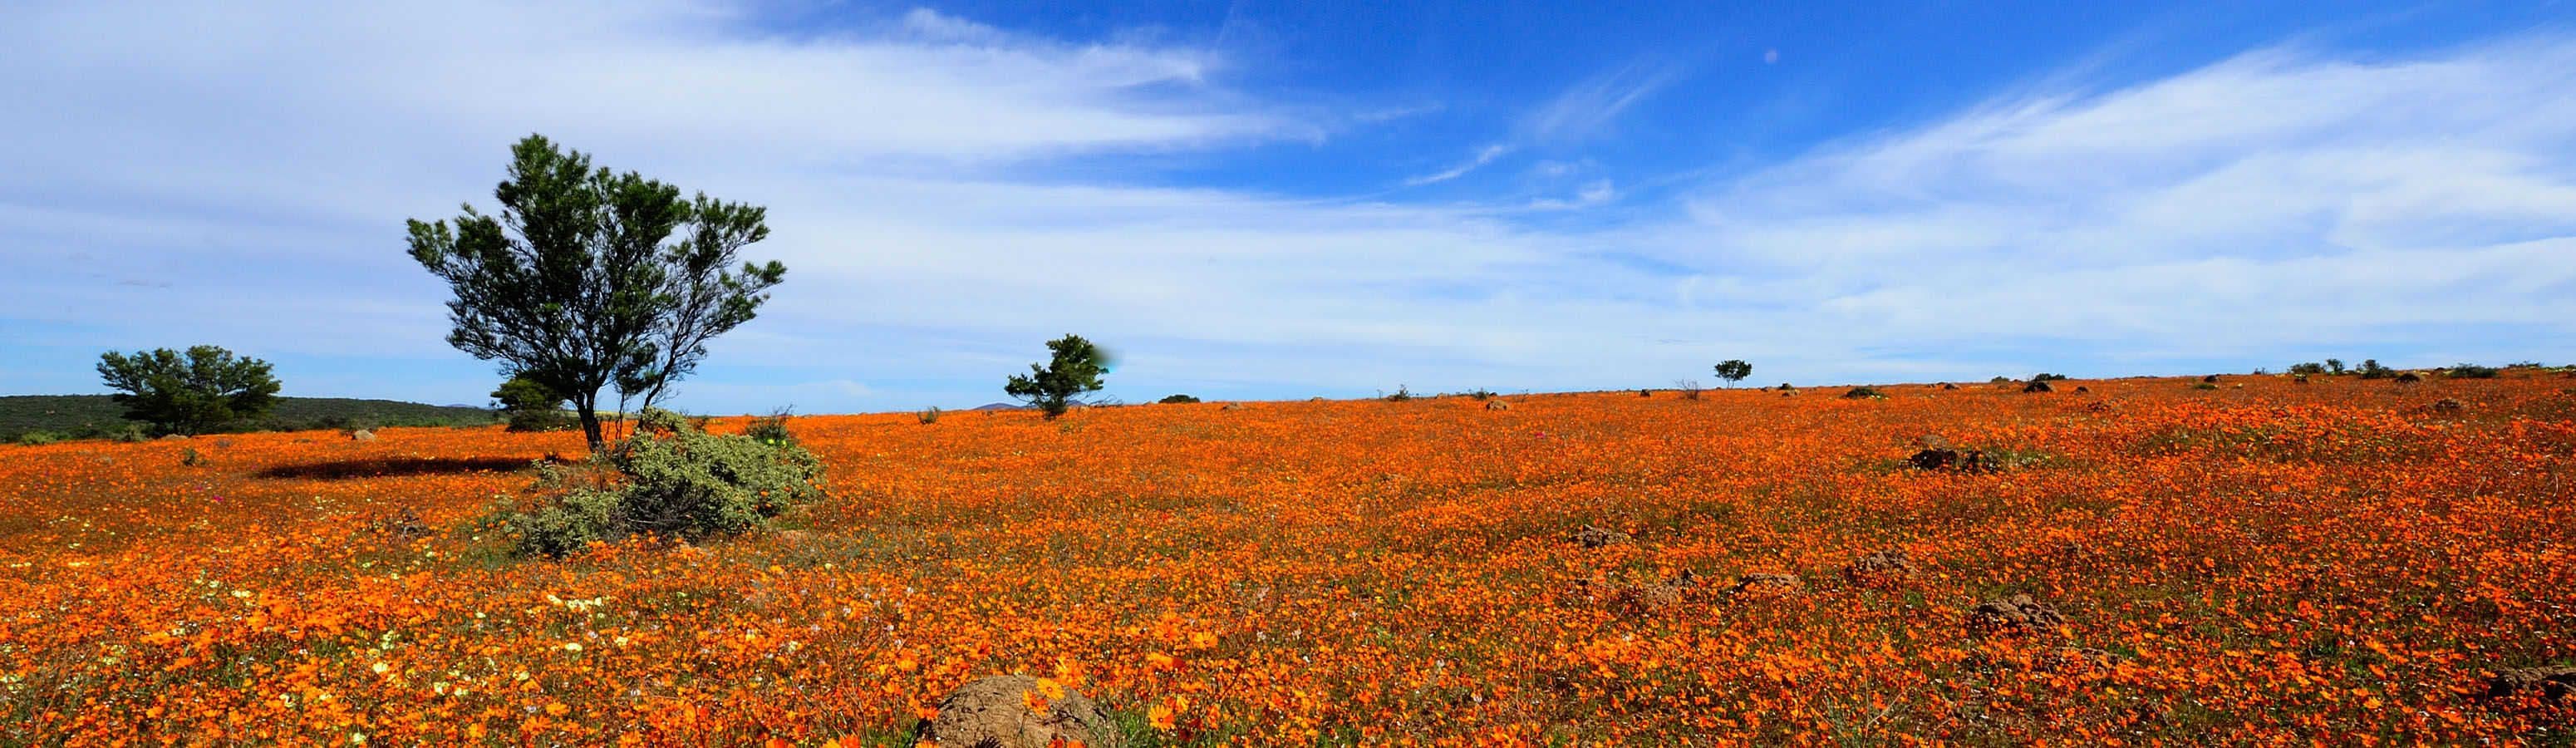 Namaqualand is a beautiful blooming desert